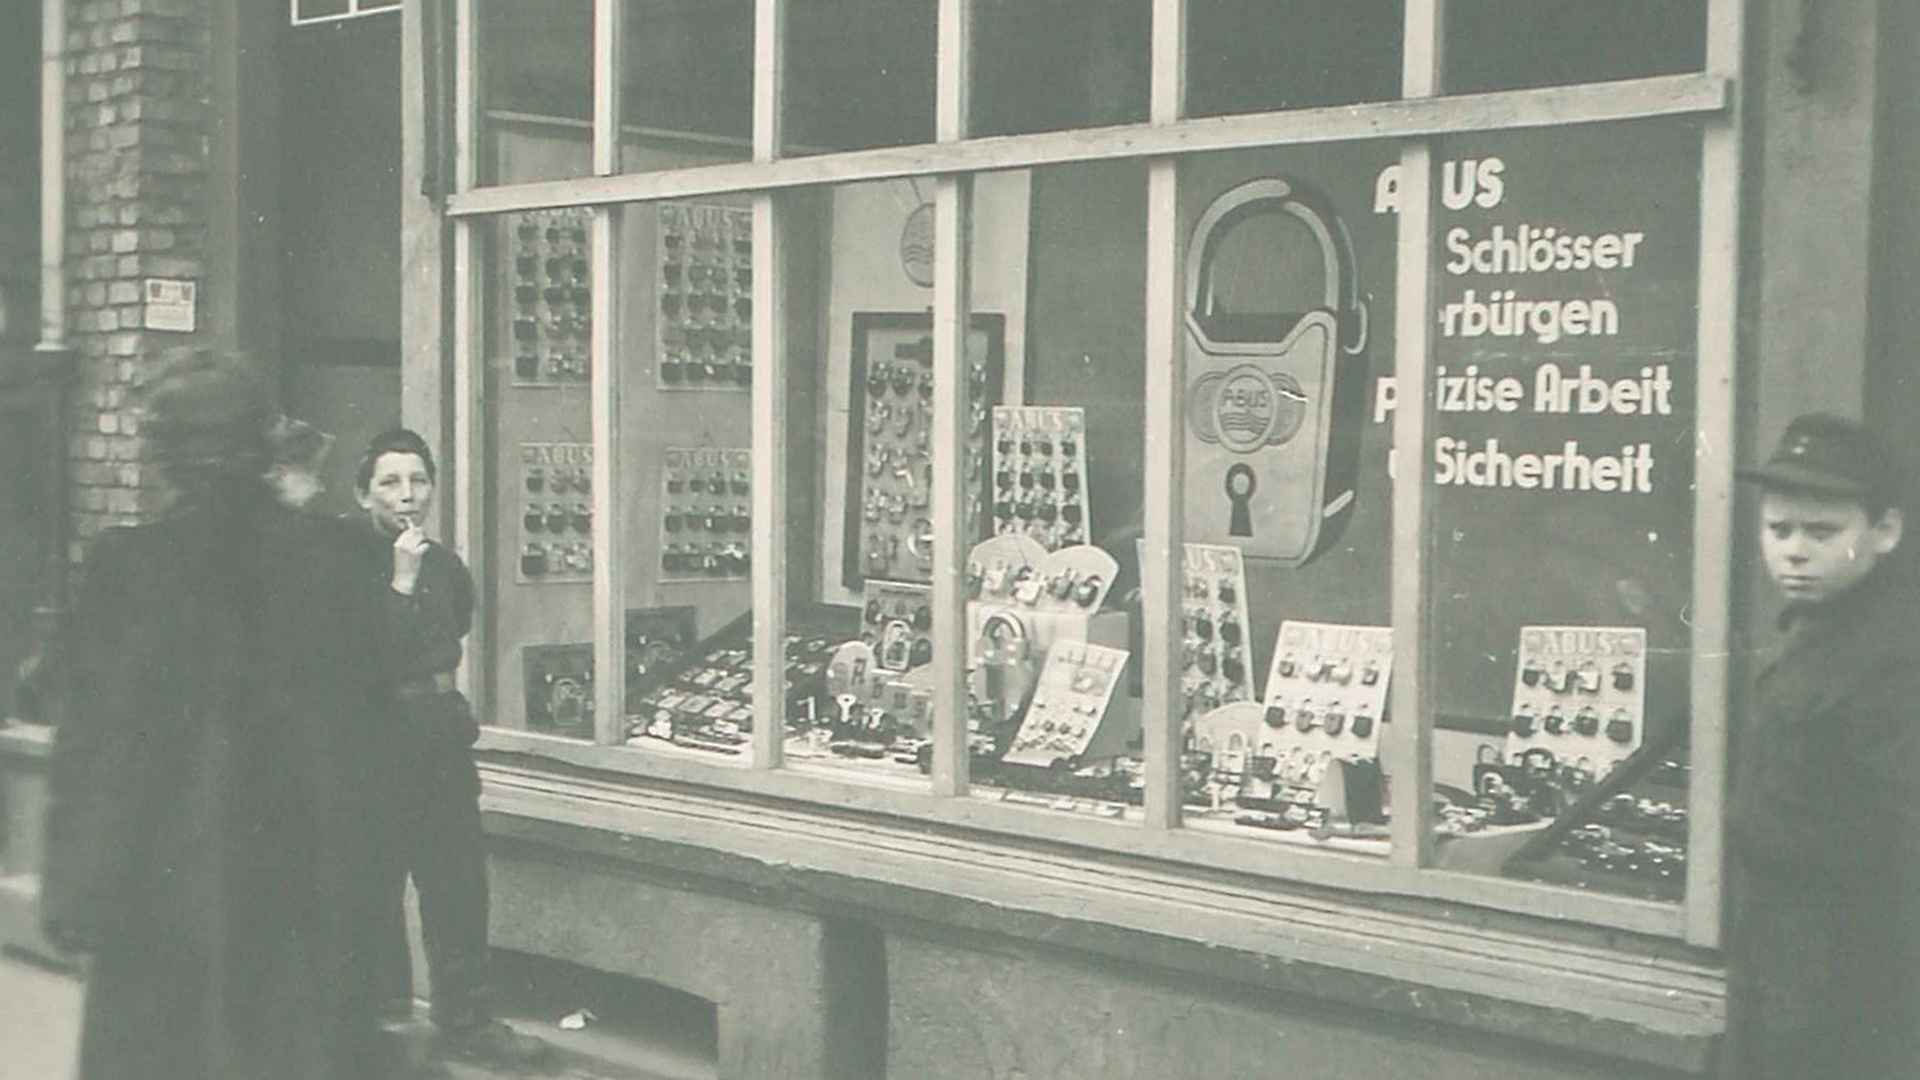 A display window containing various ABUS padlocks and promotional items © ABUS